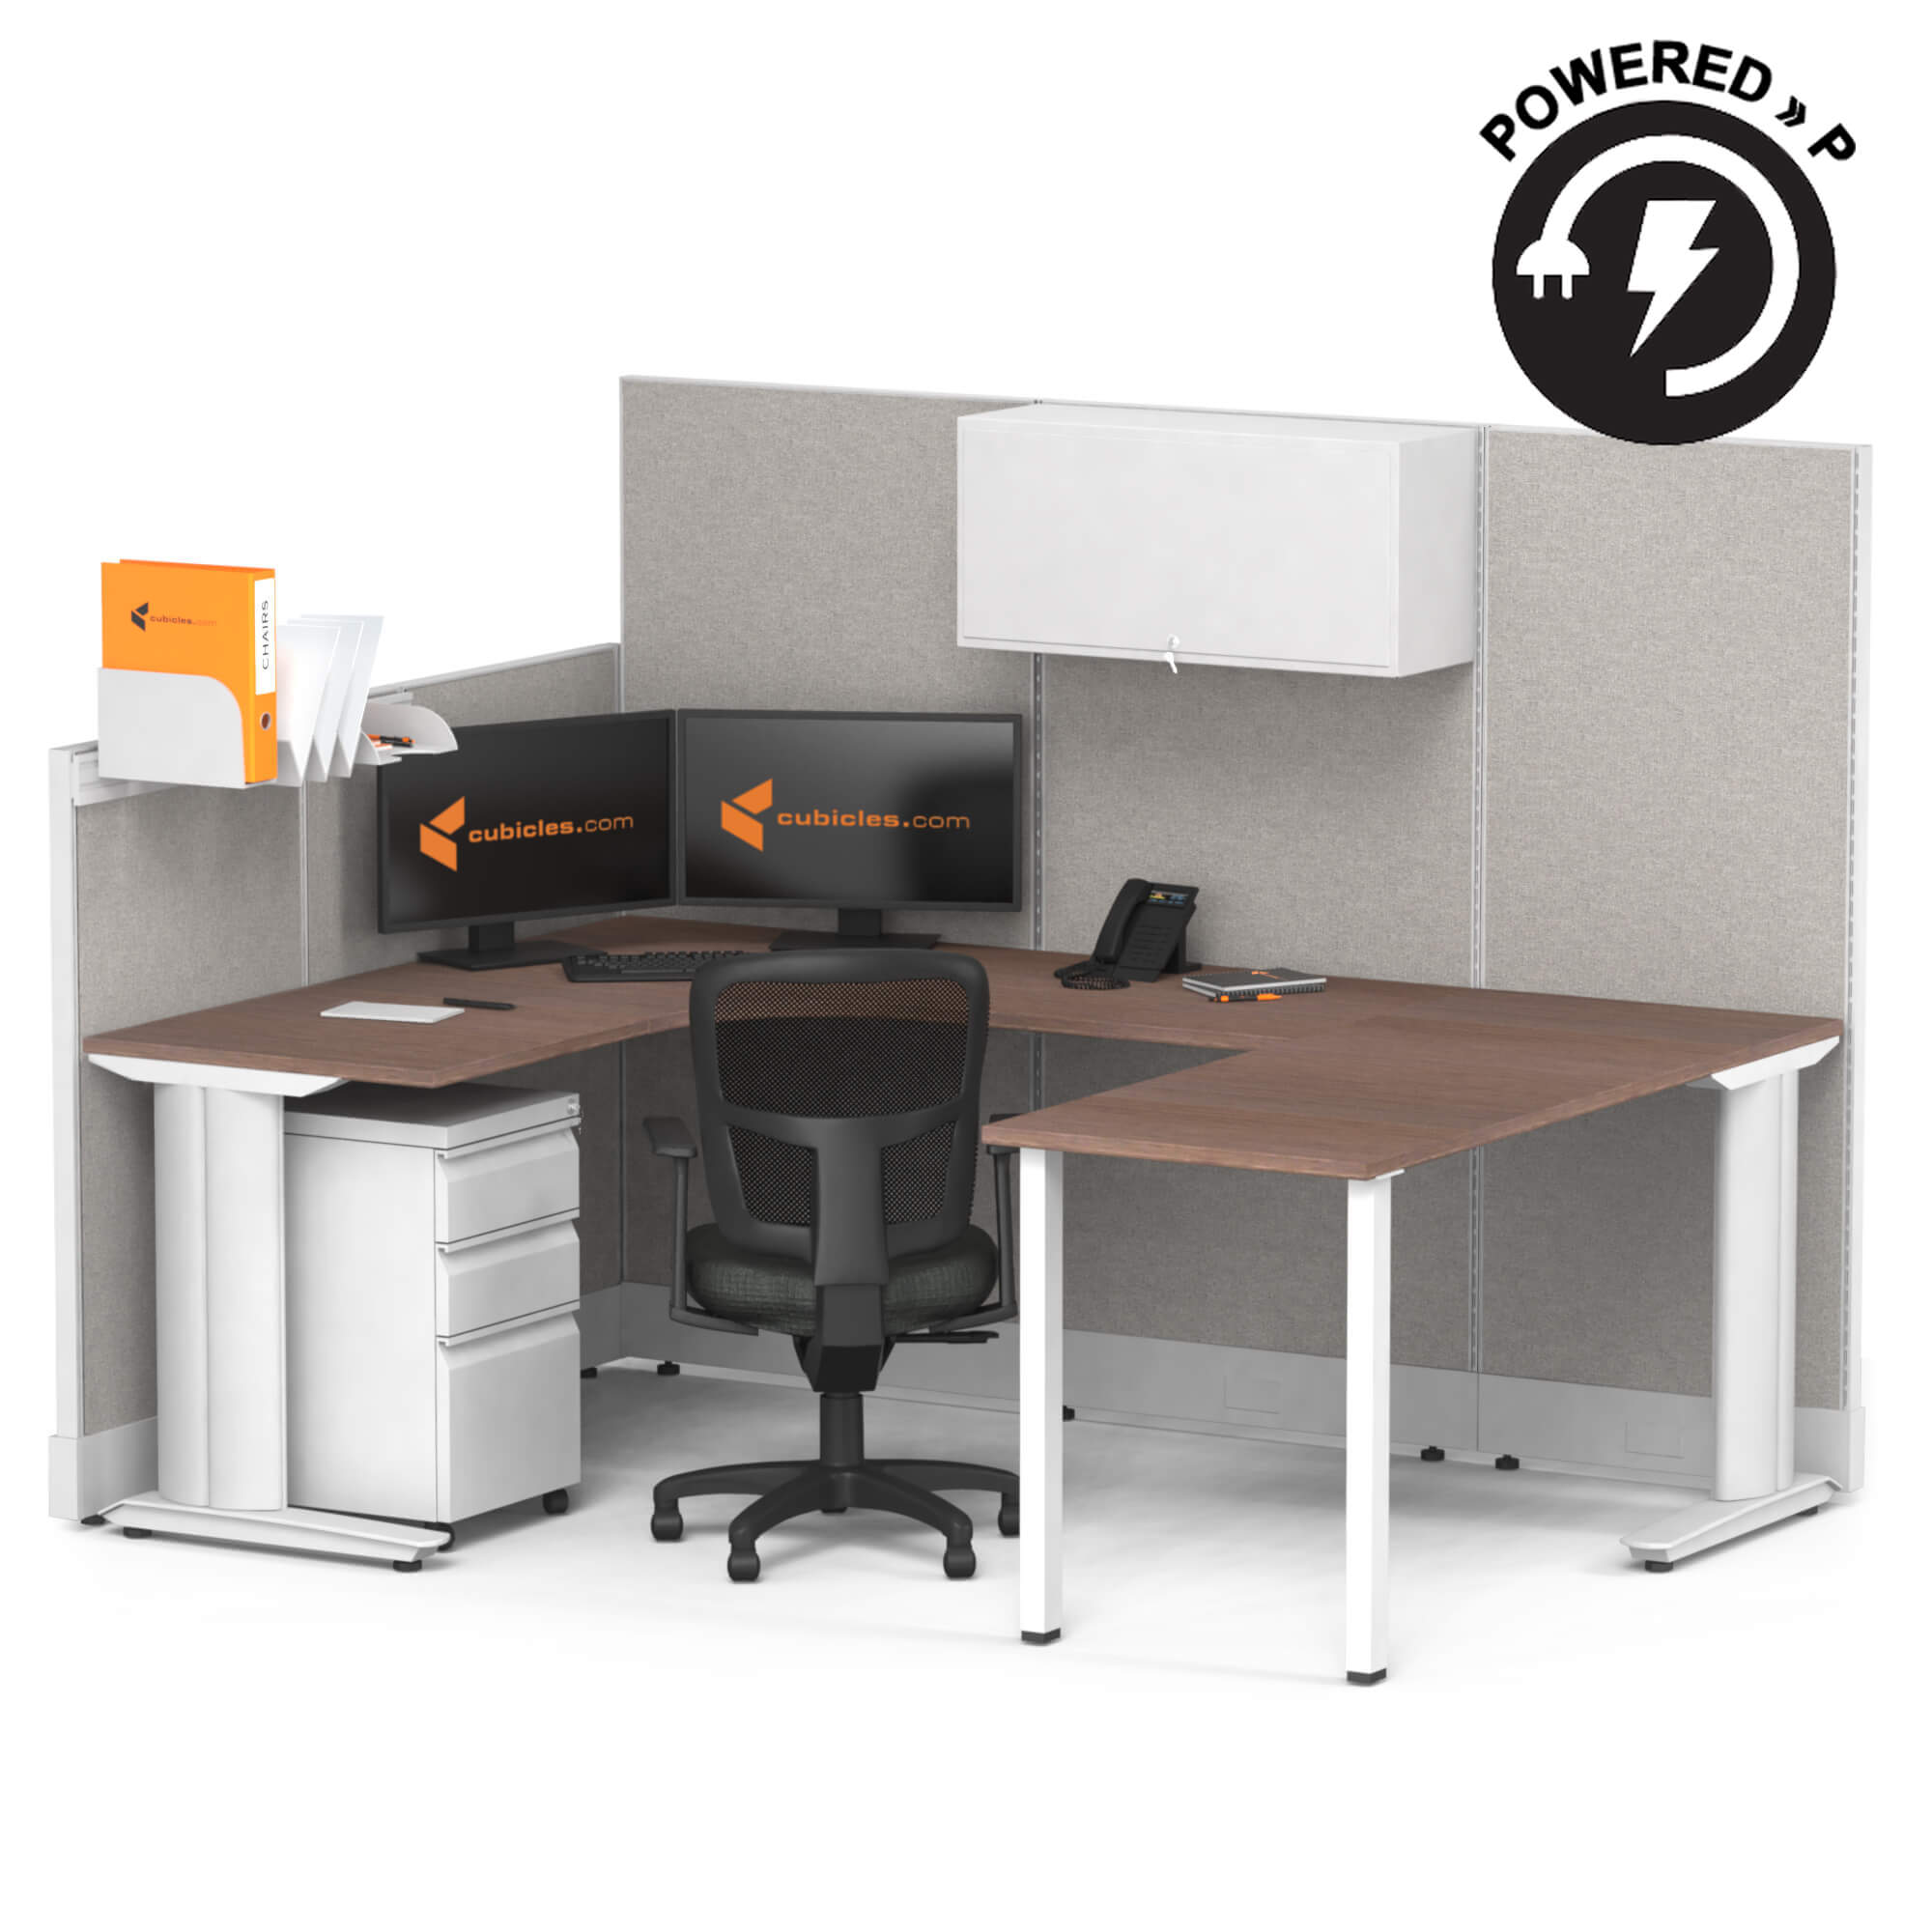 Cubicle desk u shaped with storage 1pack powered